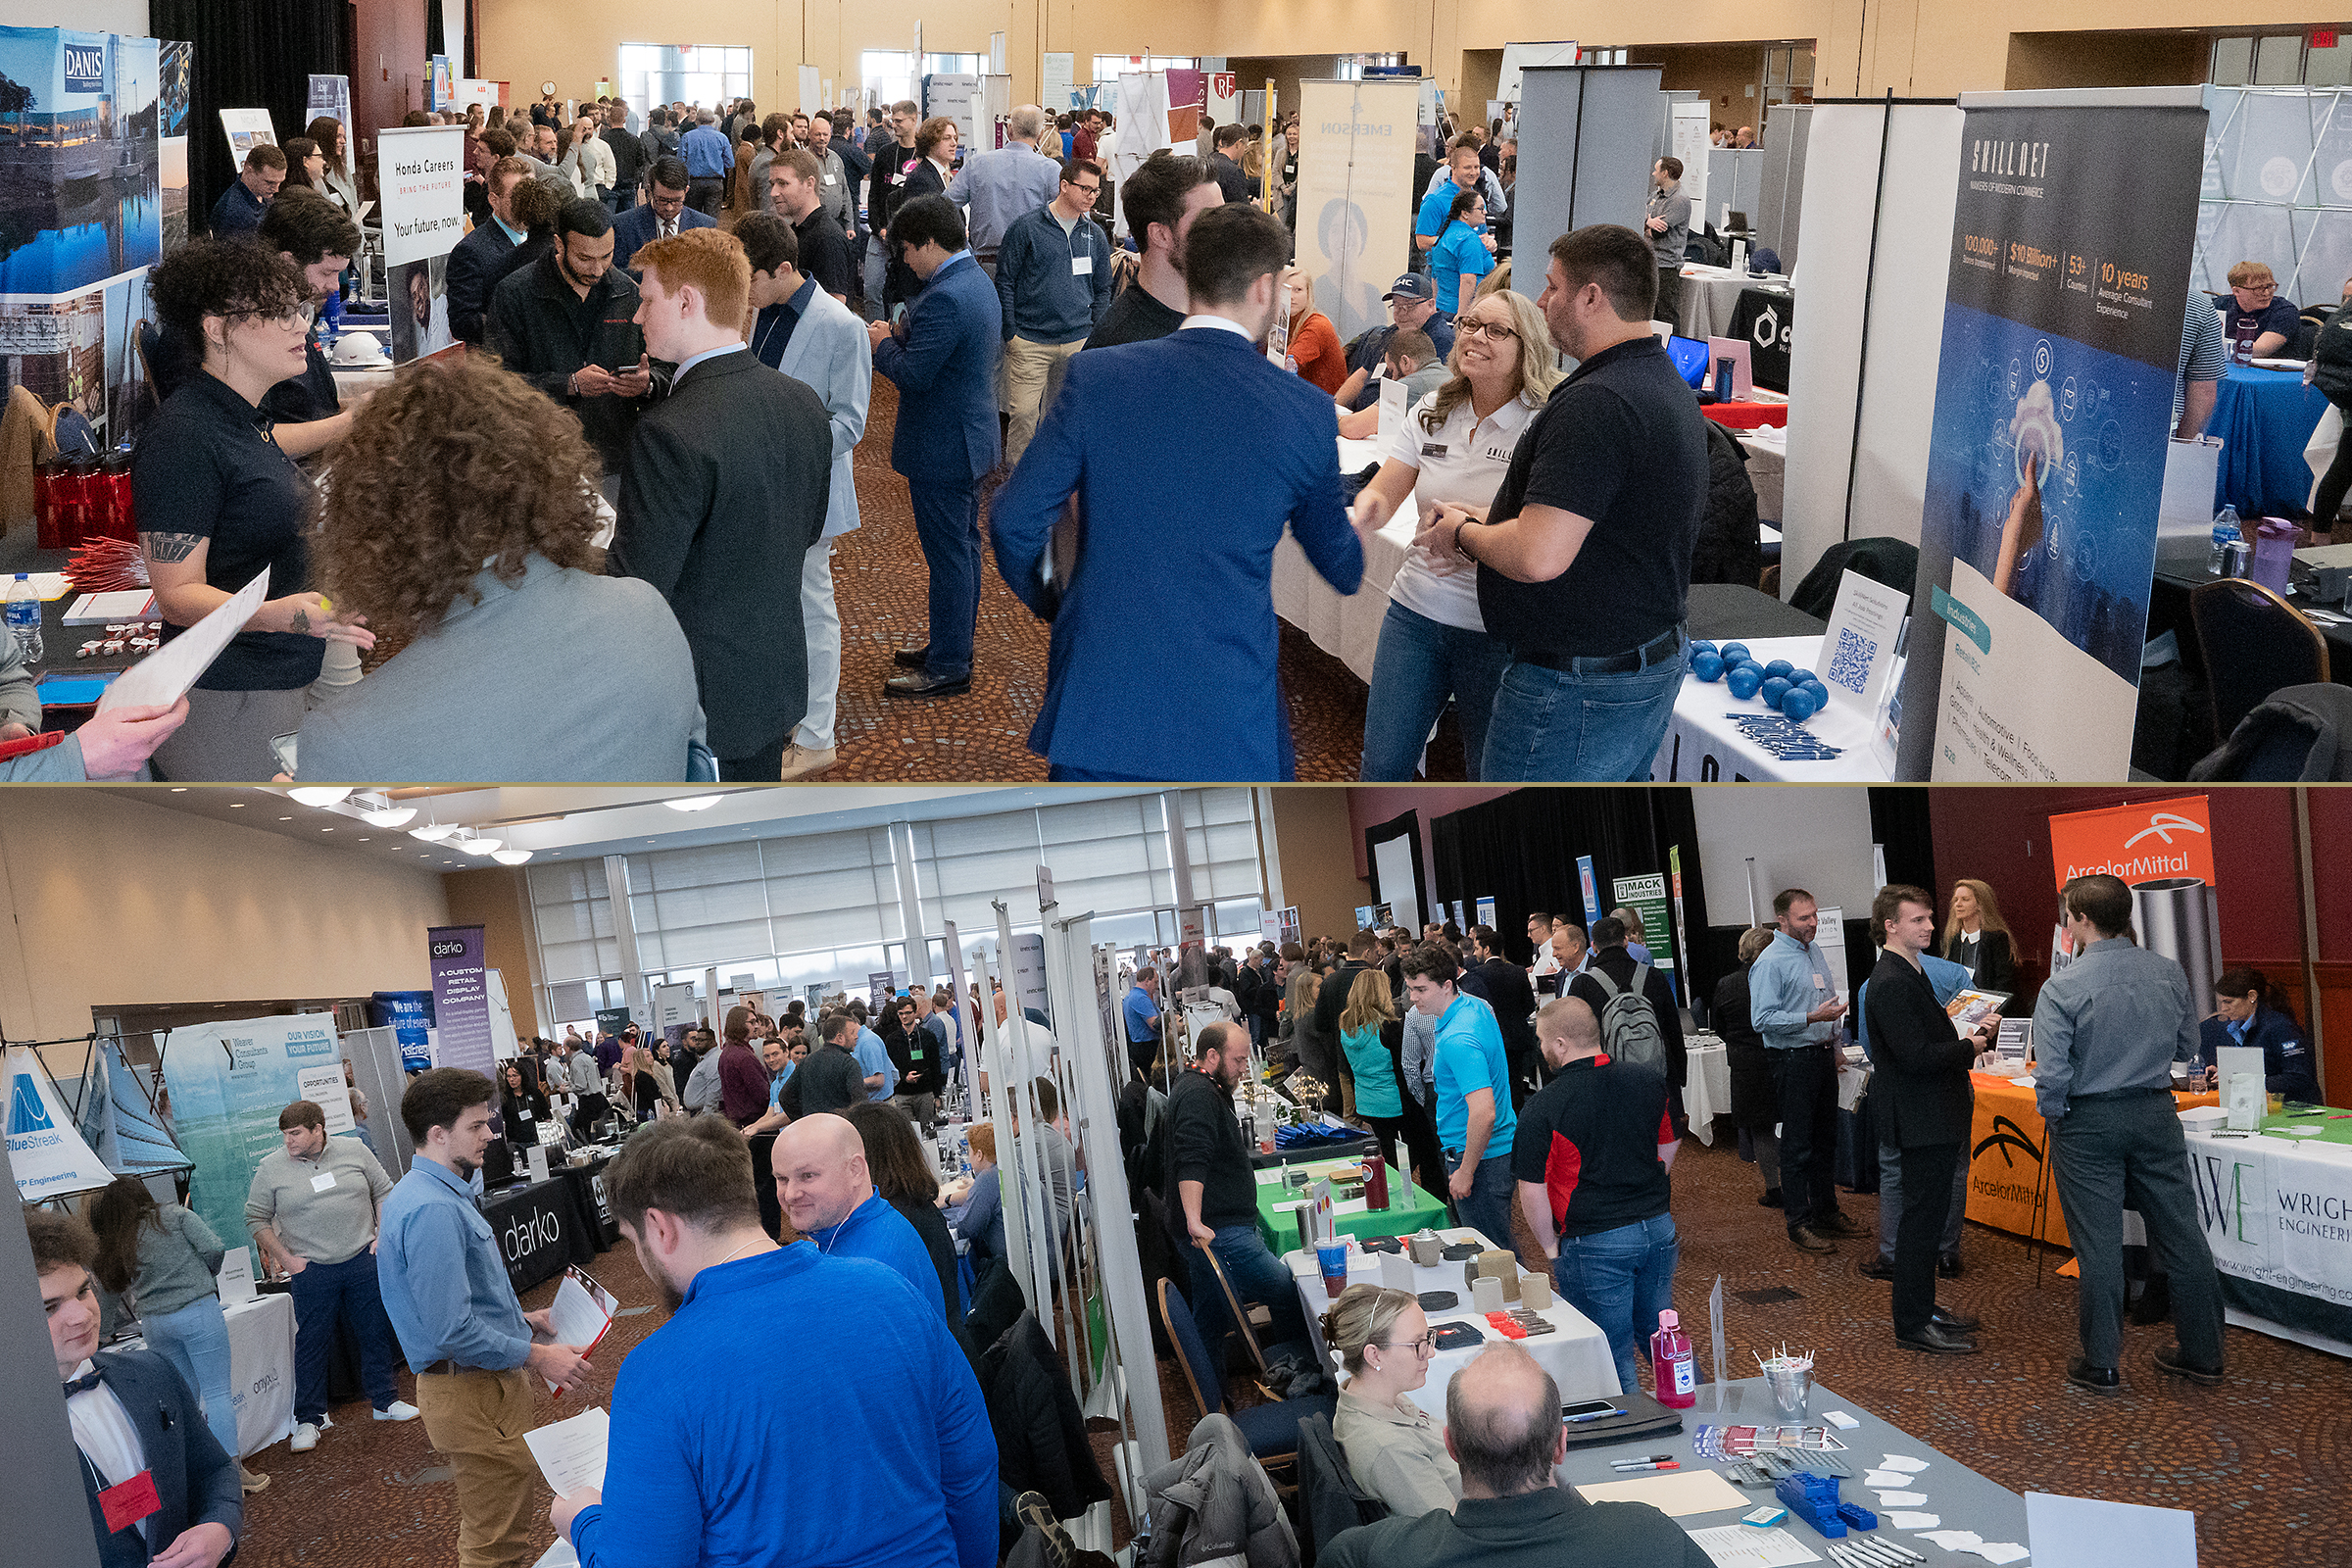 Connections, Co-ops and Careers:
Engineering Job Fair Spotlights 700 Students for Employers